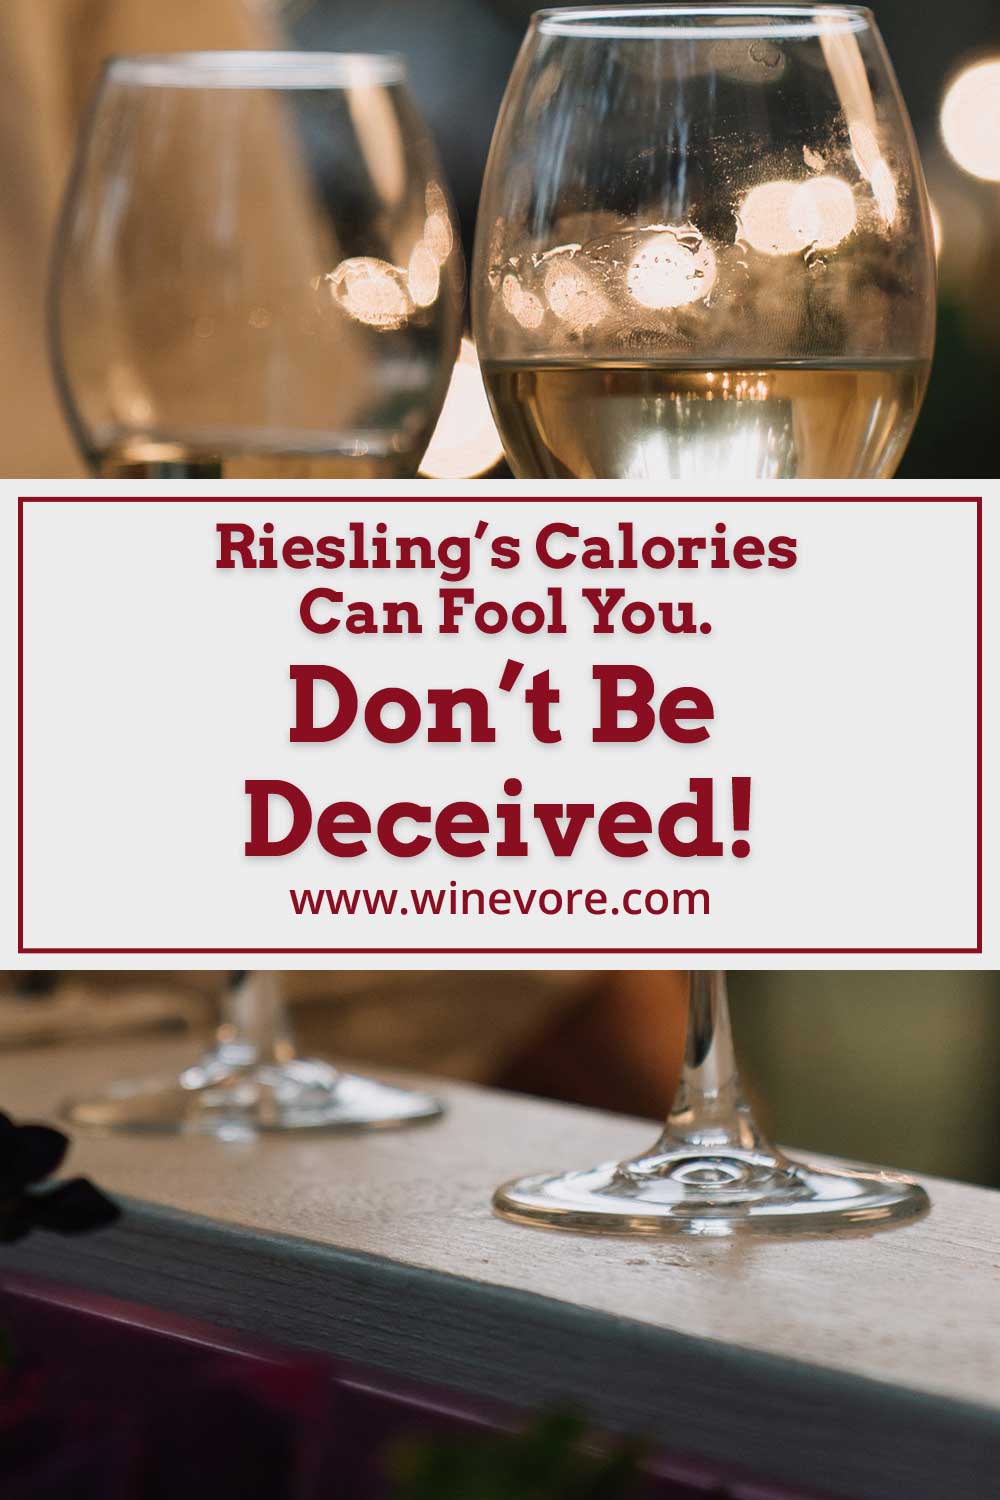 Two glasses of wine - Riesling’s Calories